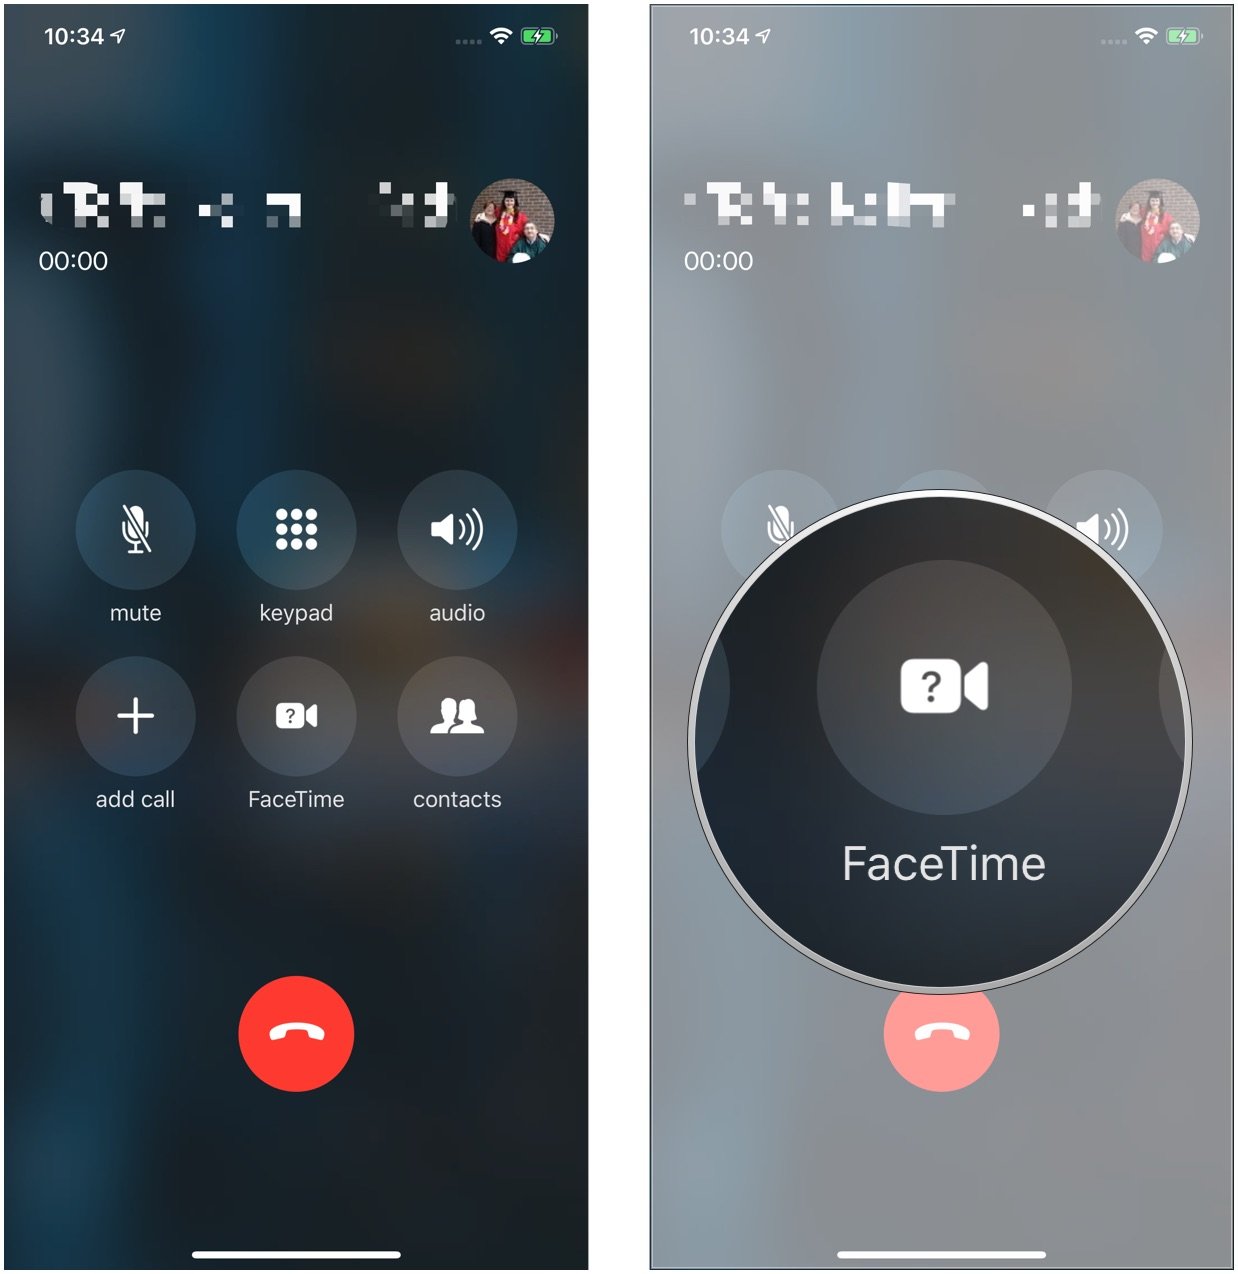 Switching from a regular phone call to a FaceTime call, showing how to view the call menu, then tap FaceTime button to start a video call